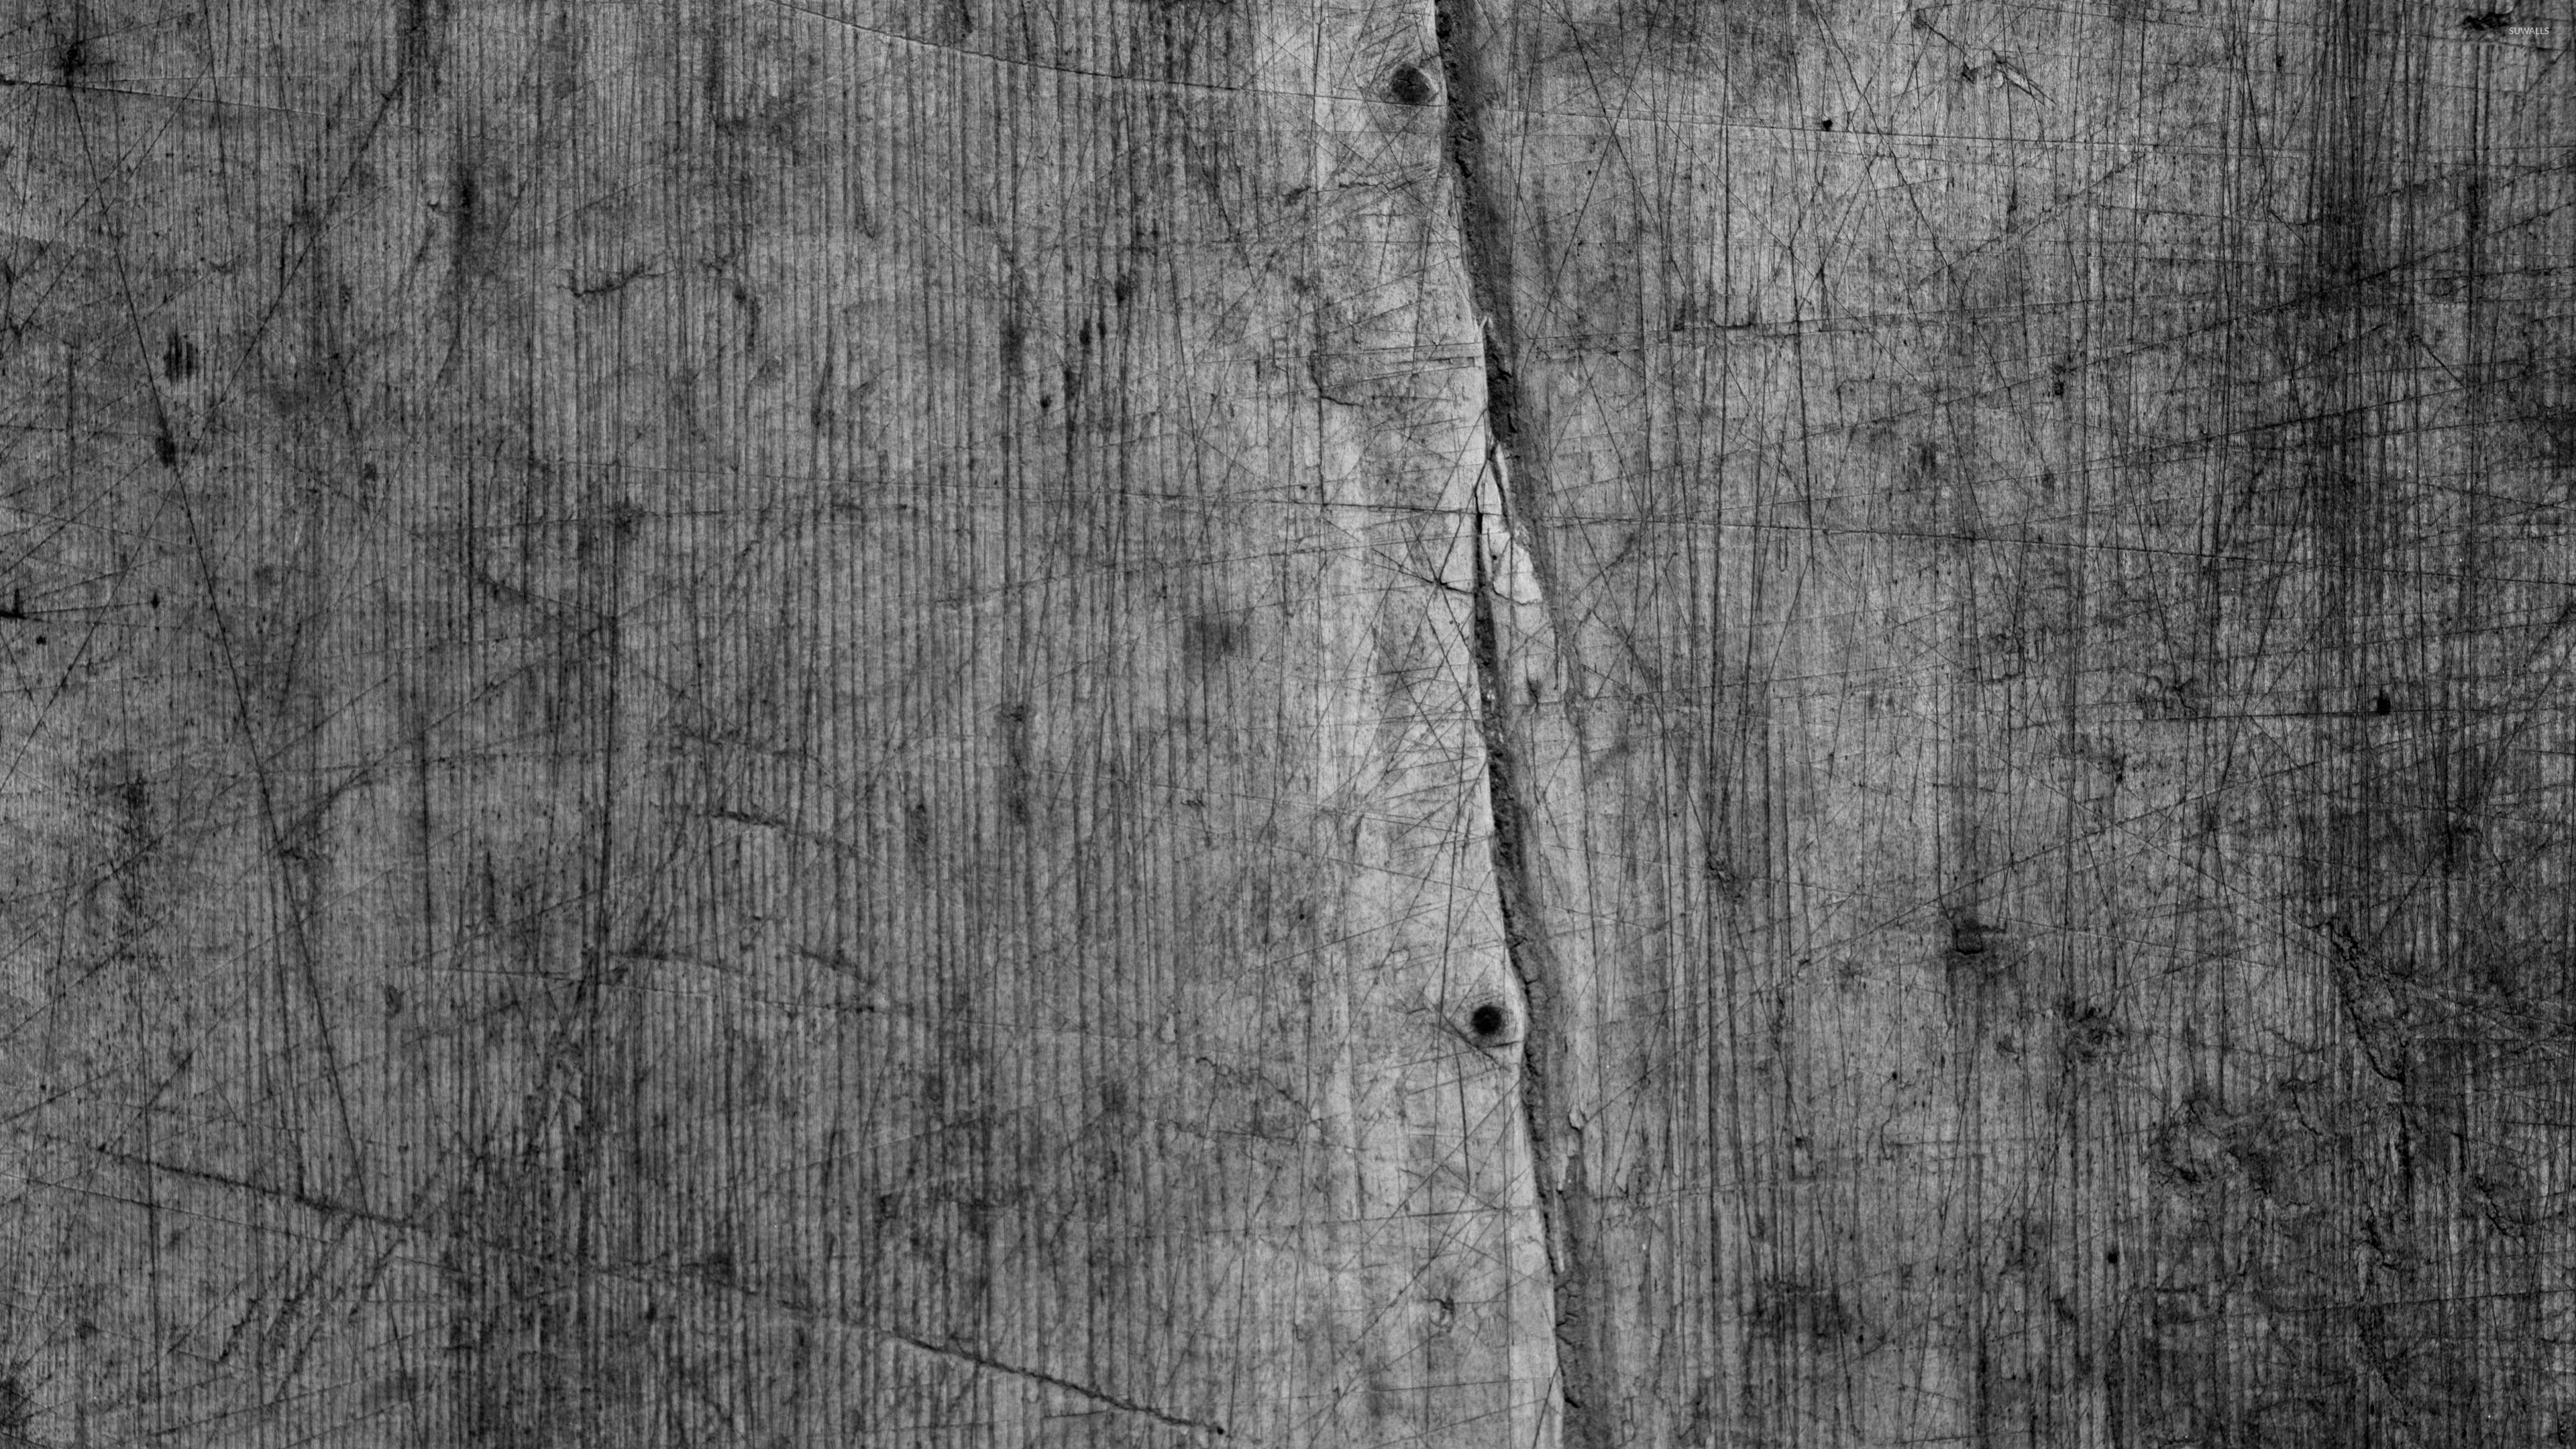 Scratched Wood Texture